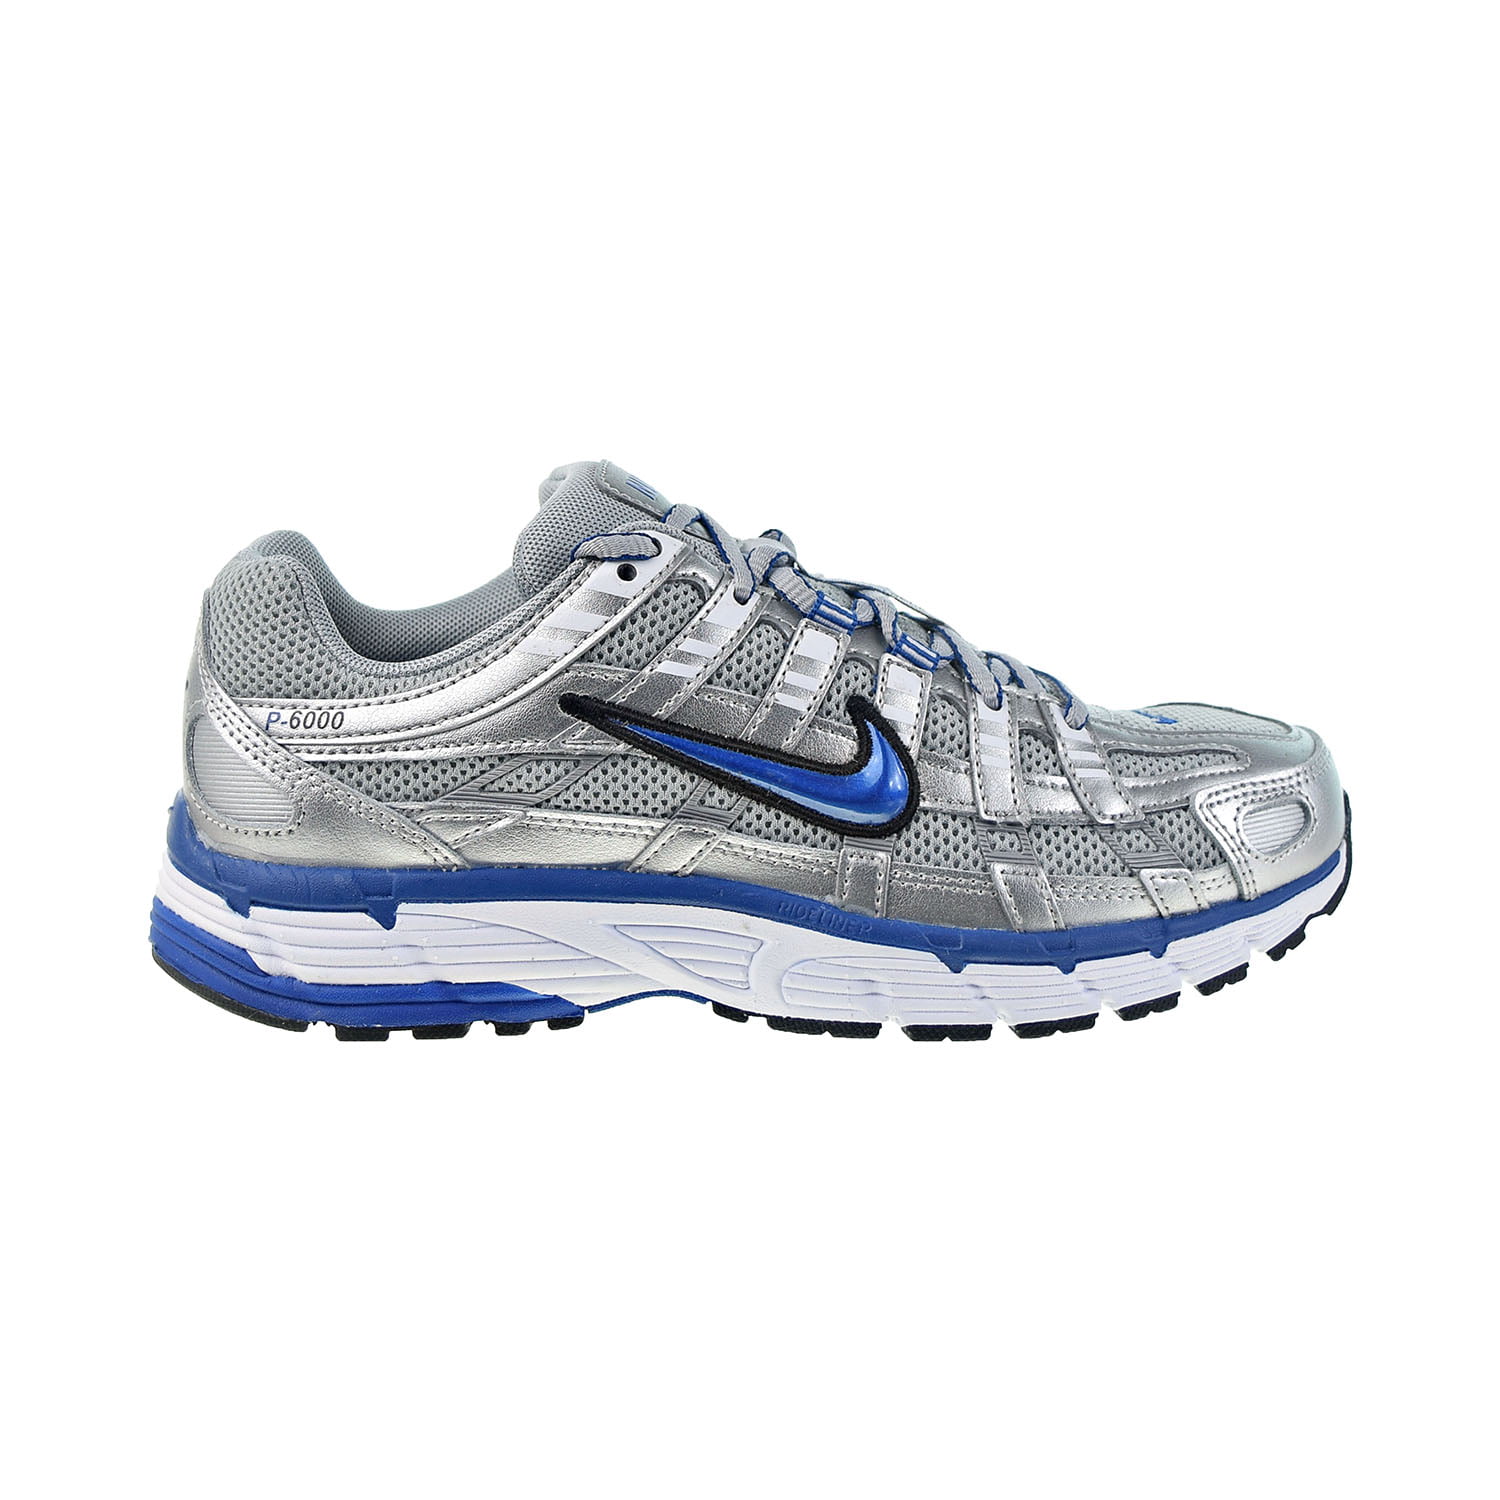 Useful Pets Person in charge of sports game Nike P-6000 Women's Shoes Metallic Silver-Racer Blue-White-Black bv1021-001  - Walmart.com